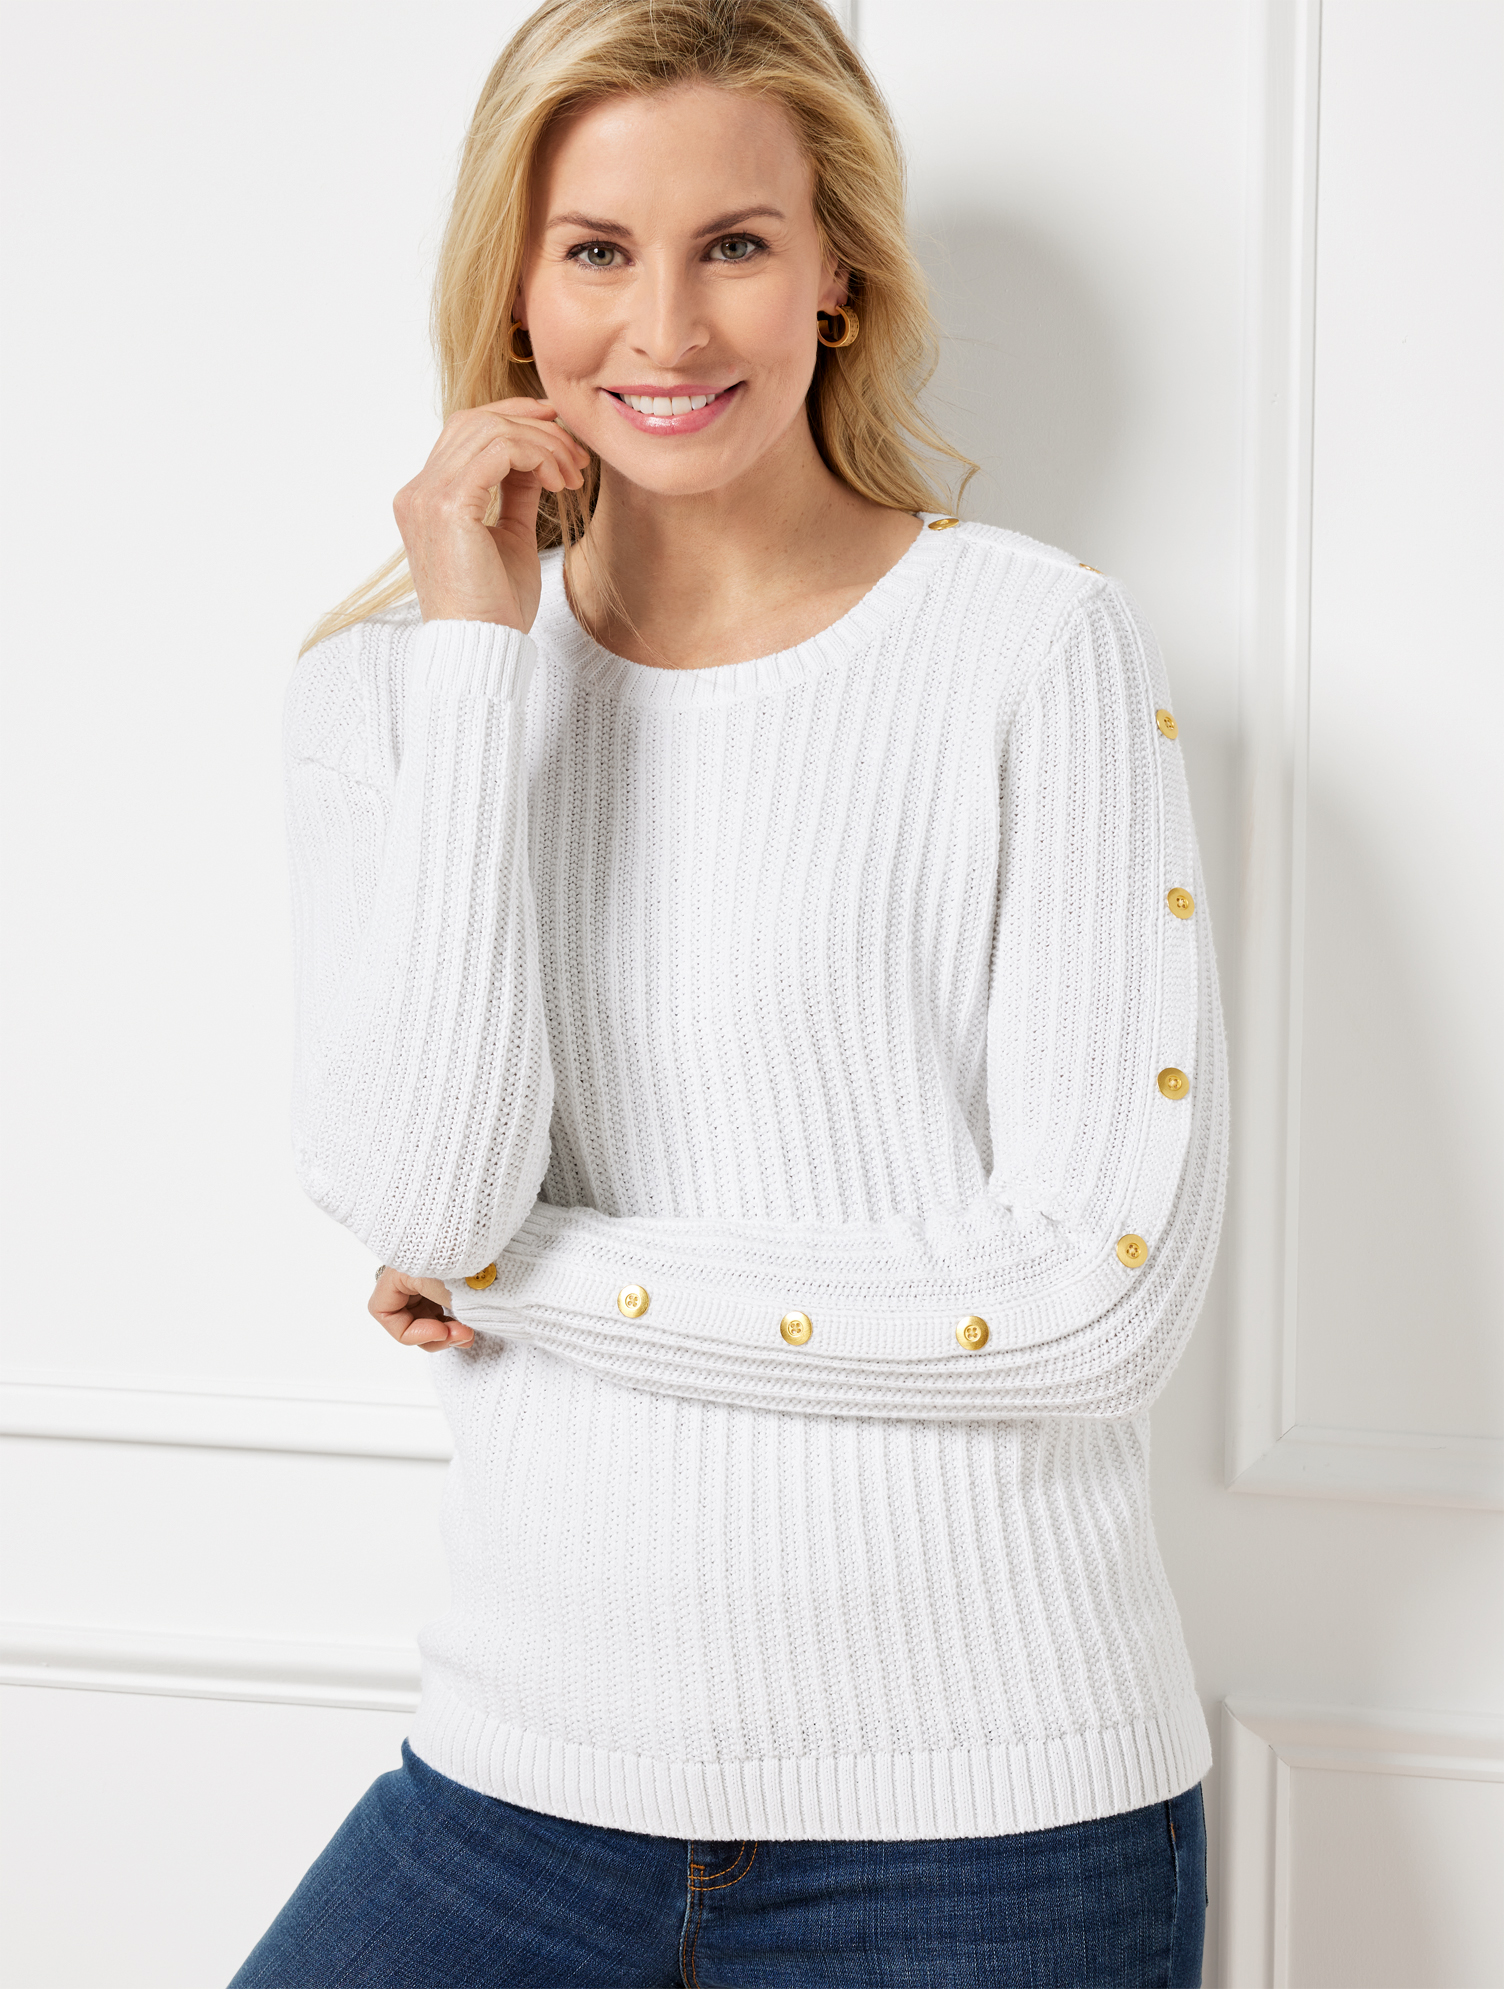 Talbots Button Detail Pullover Sweater - White - 2x